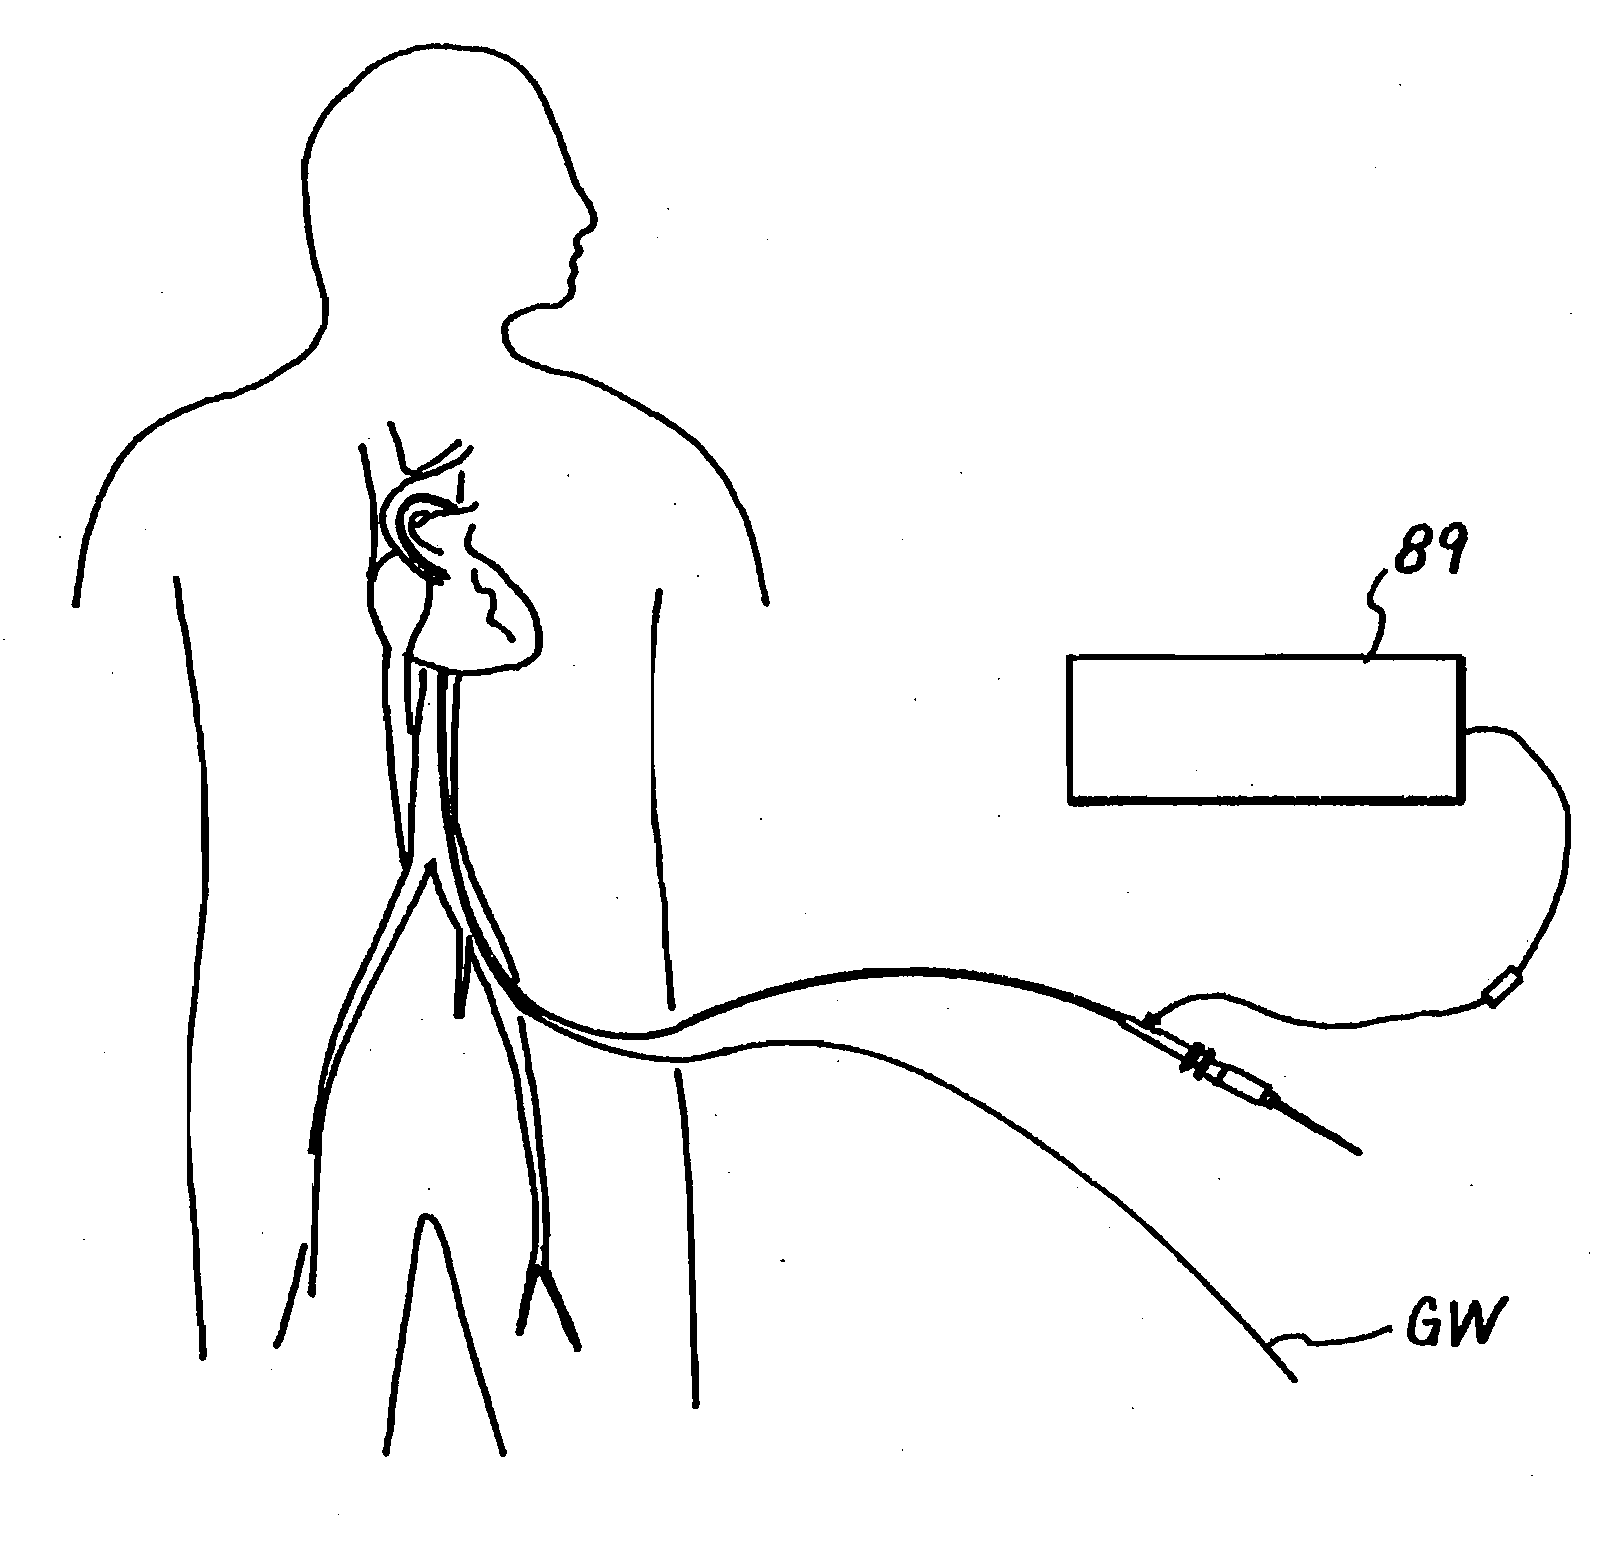 Tissue Penetrating Catheters having Integral Imaging Transducers and Their Methods of Use